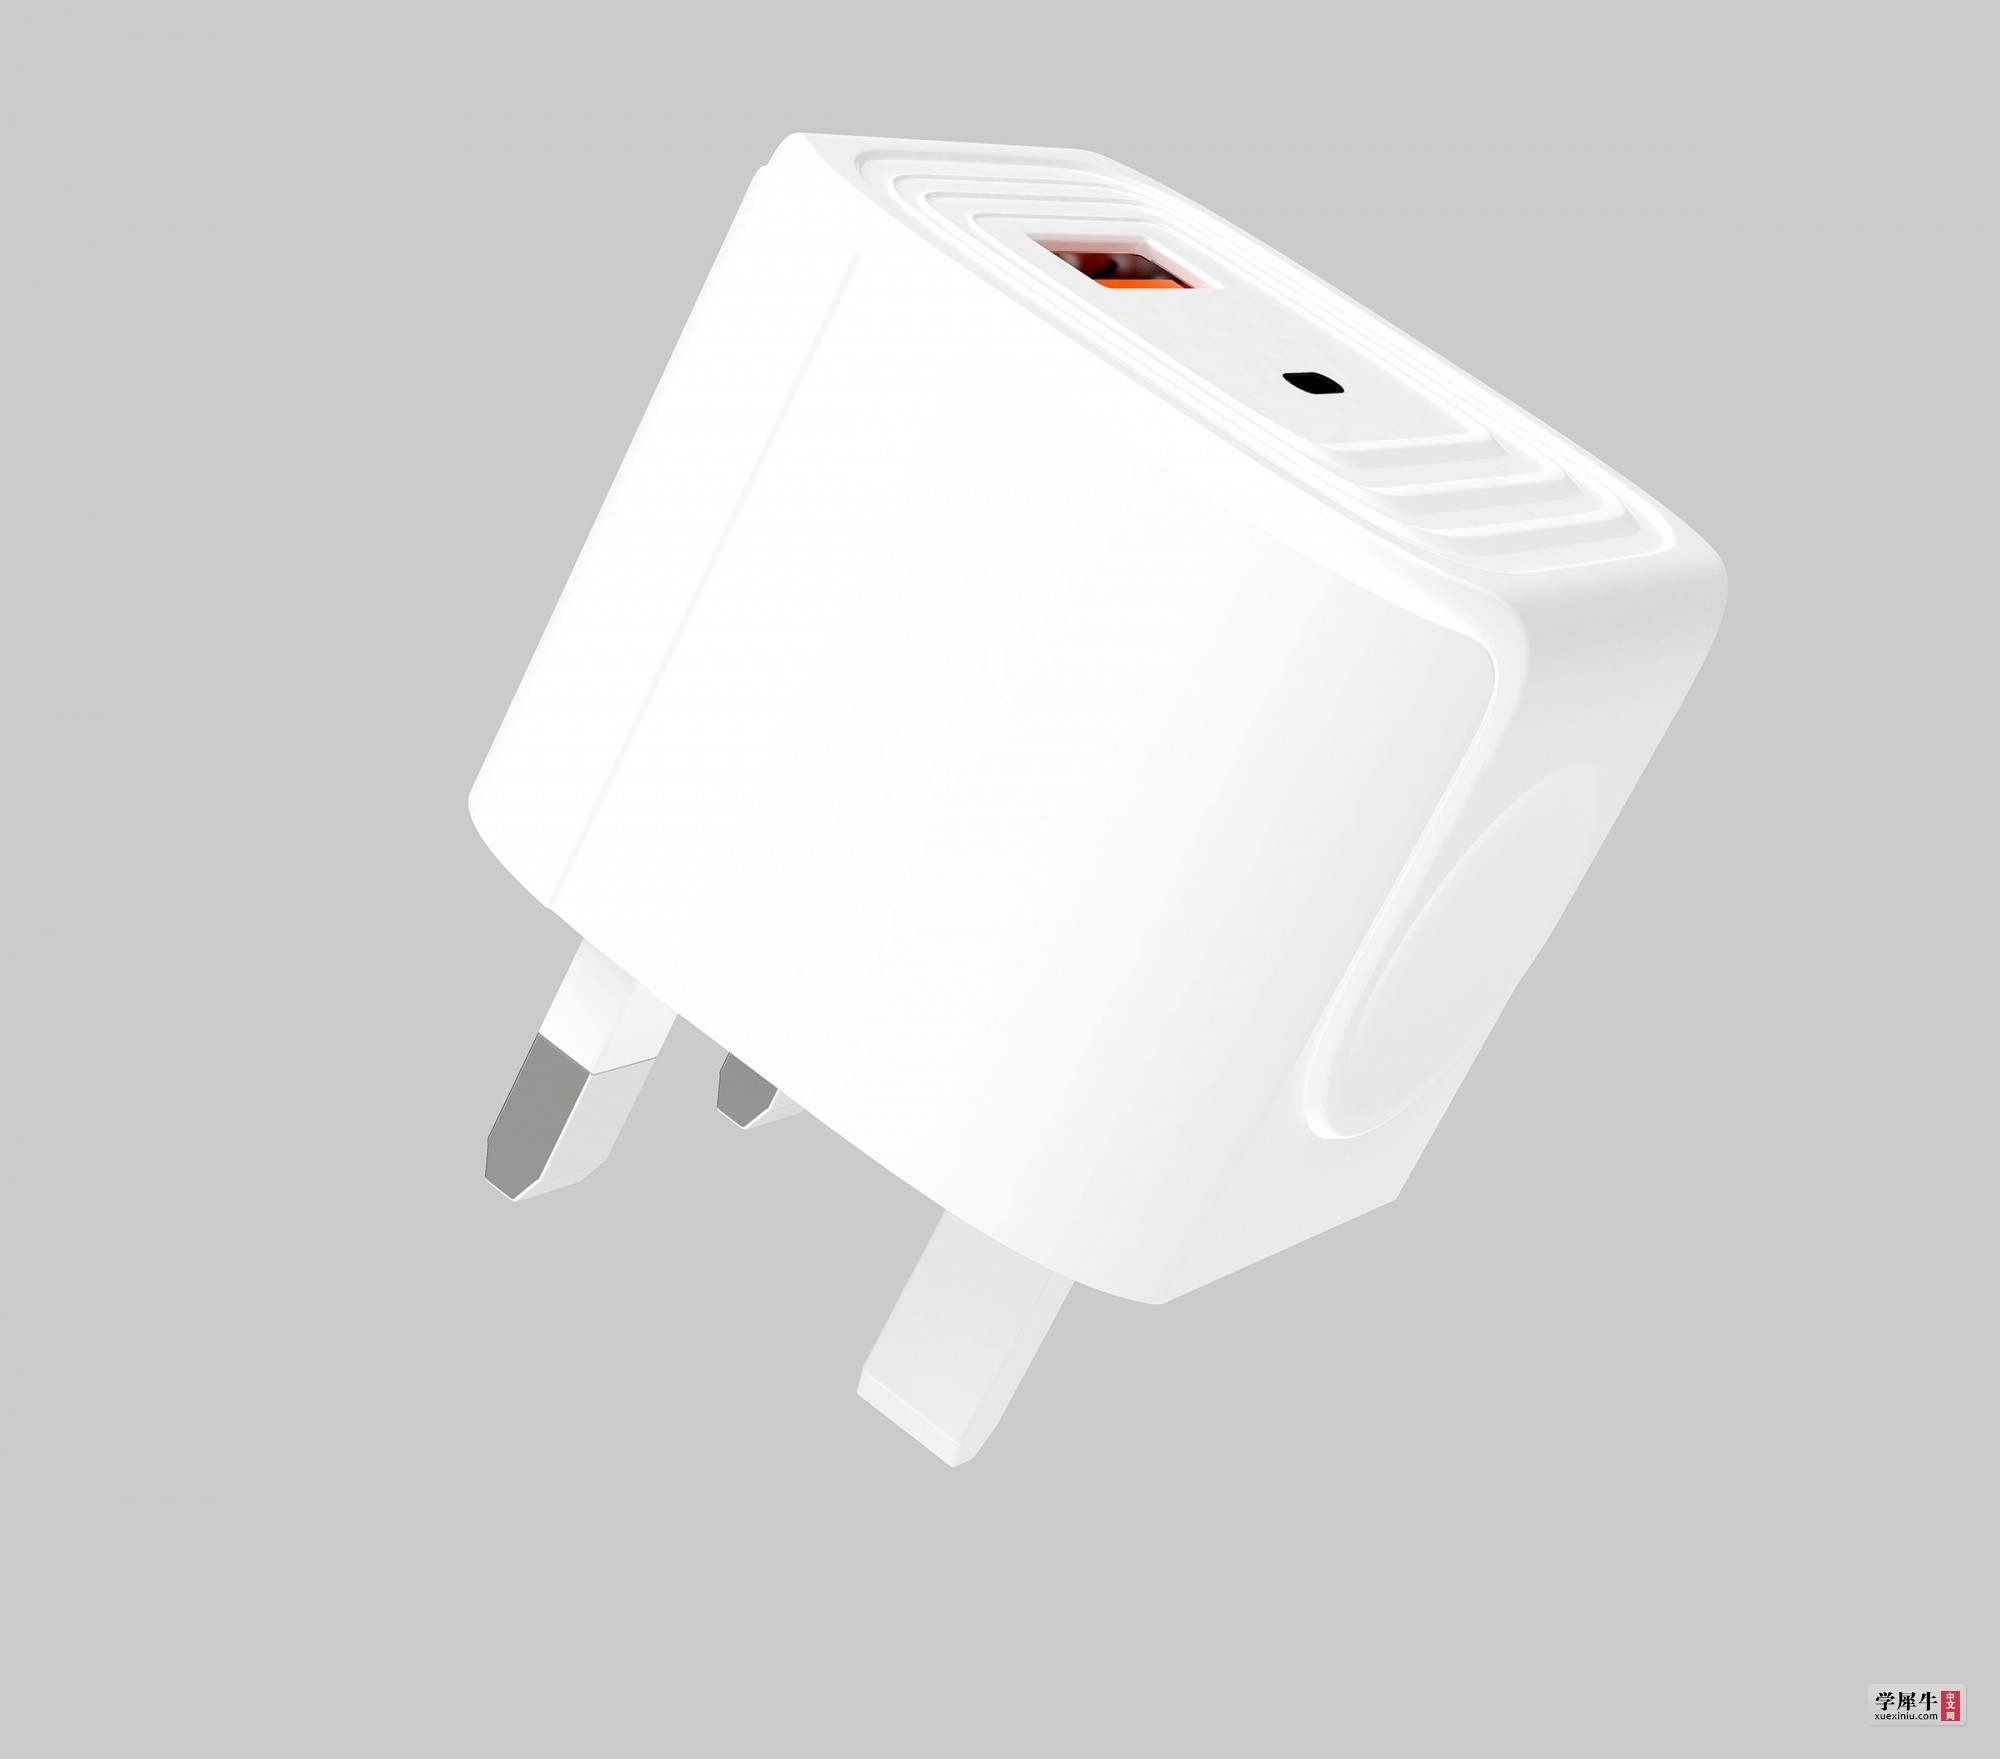 PIN JUE CHARGER 2019-11-05.932011 拷贝.jpg